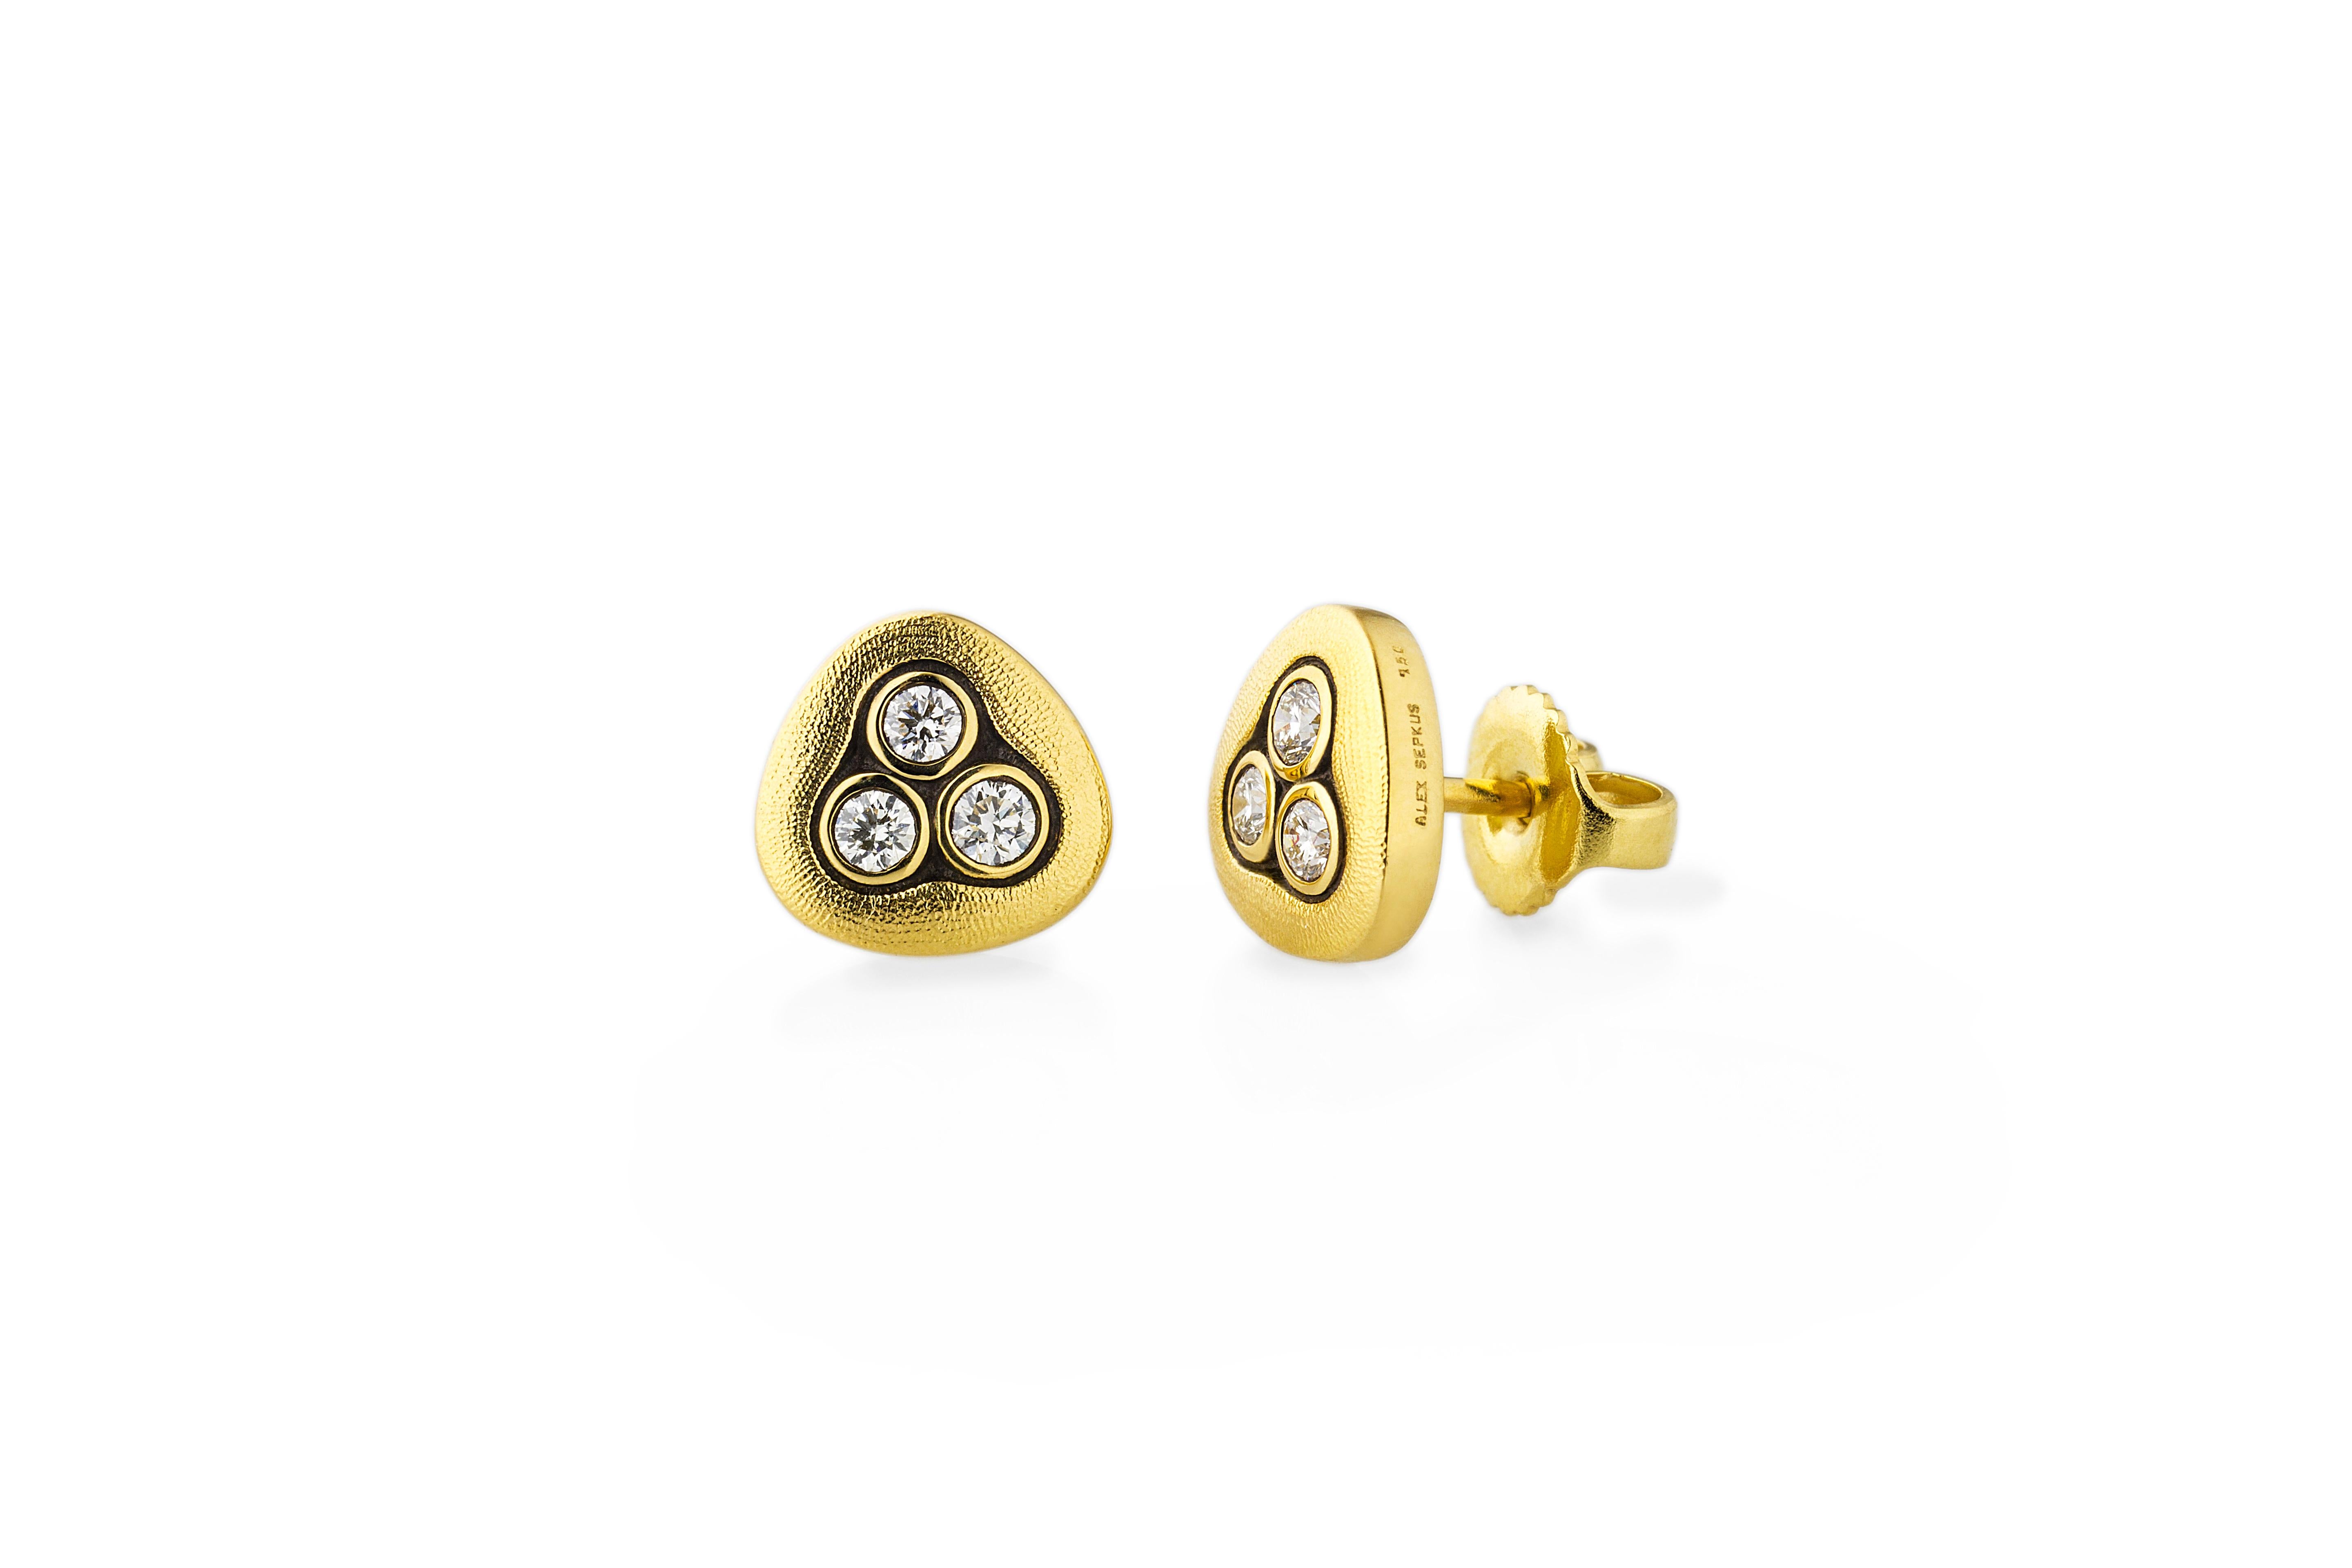 18K Gold Alex Sepkus Diamond Swirling Water Studs.  These beautiful earrings have 6 round brilliant diamonds .24CT Diamonds.  Three Diamonds set in beautiful, soft triangular setting.  Very sparkly Diamonds!   A lot of look for a dainty stud! 